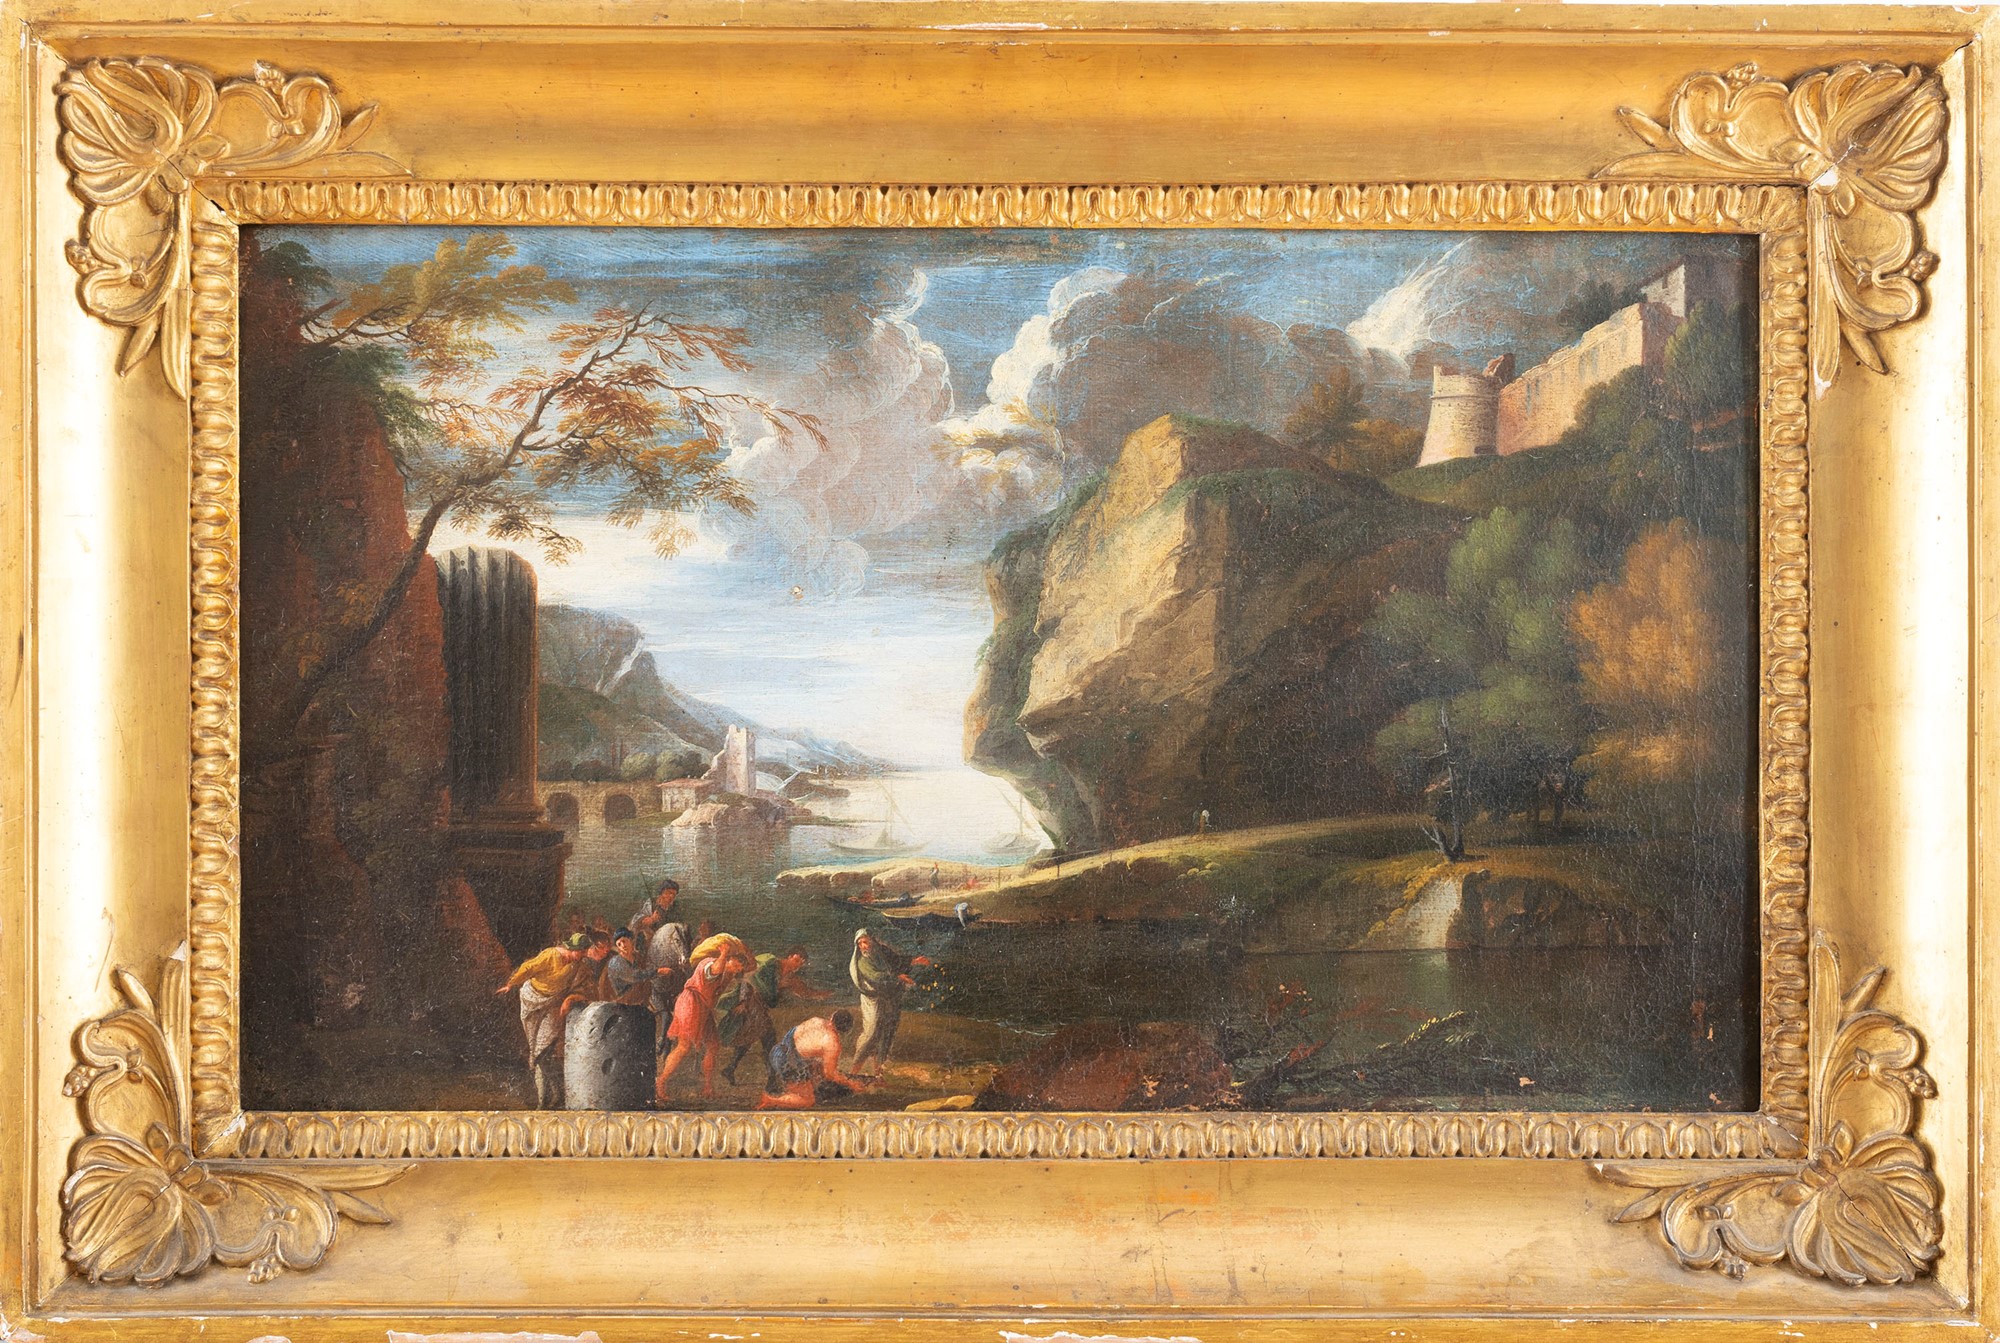 Neapolitan school, XVII century - Two river landscapes with rocky mountains - Image 6 of 7